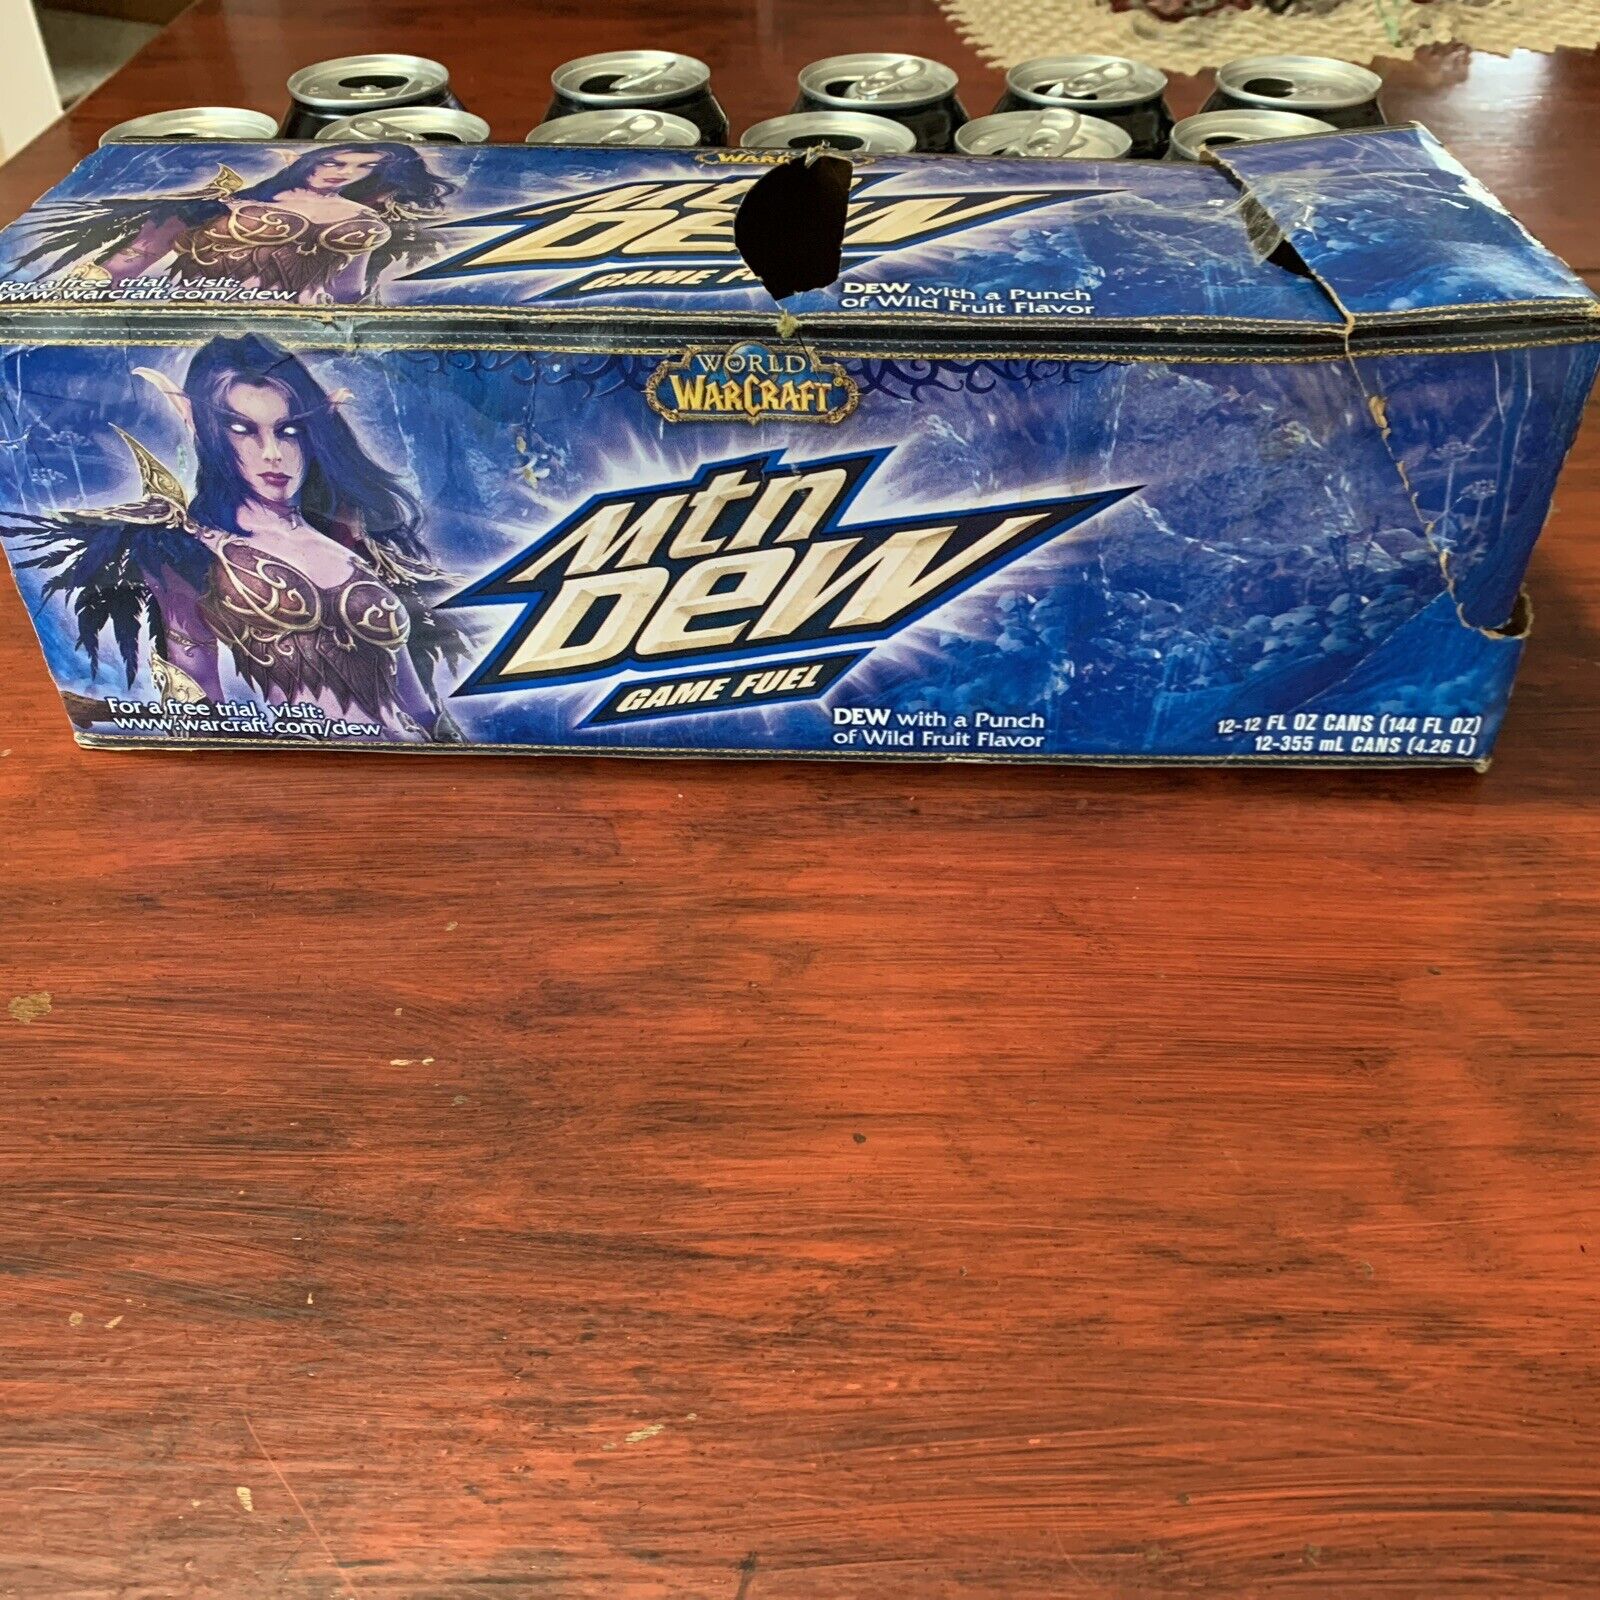 11 2009 Mountain Dew World of WarCraft Game Fuel Blue Cans With Case Empty